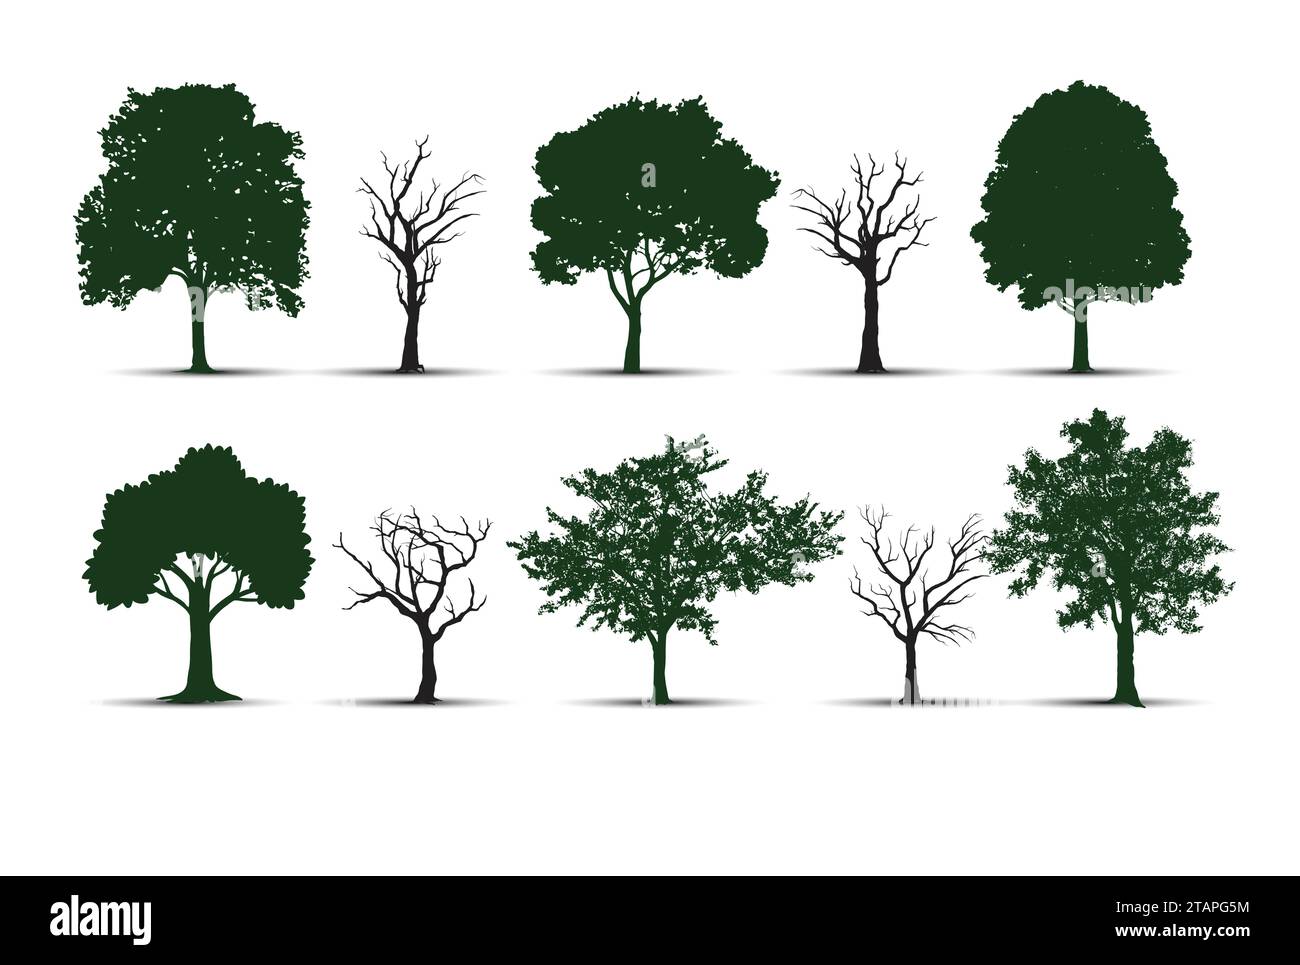 vector trees isolated on white background, vector trees set image component Stock Vector